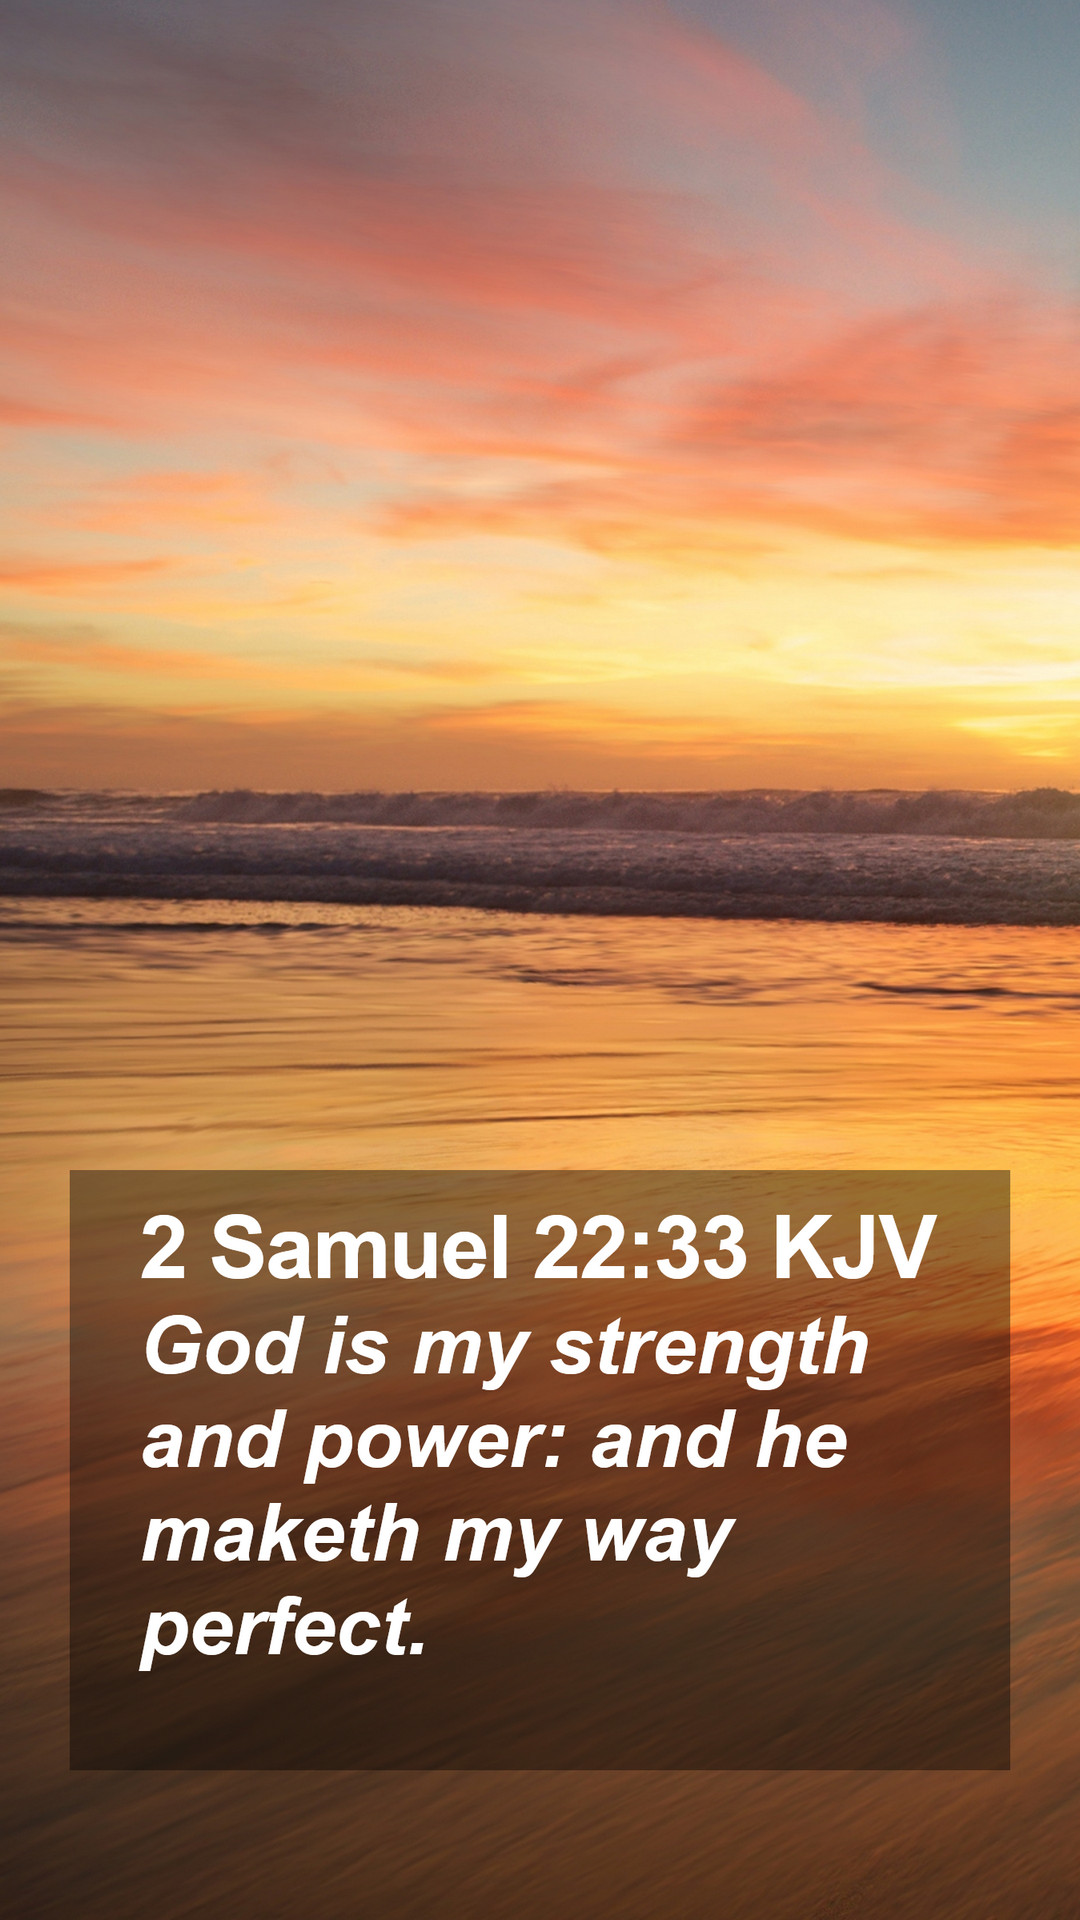 Samuel 22:33 KJV Mobile Phone Wallpaper is my strength and power: and he maketh my